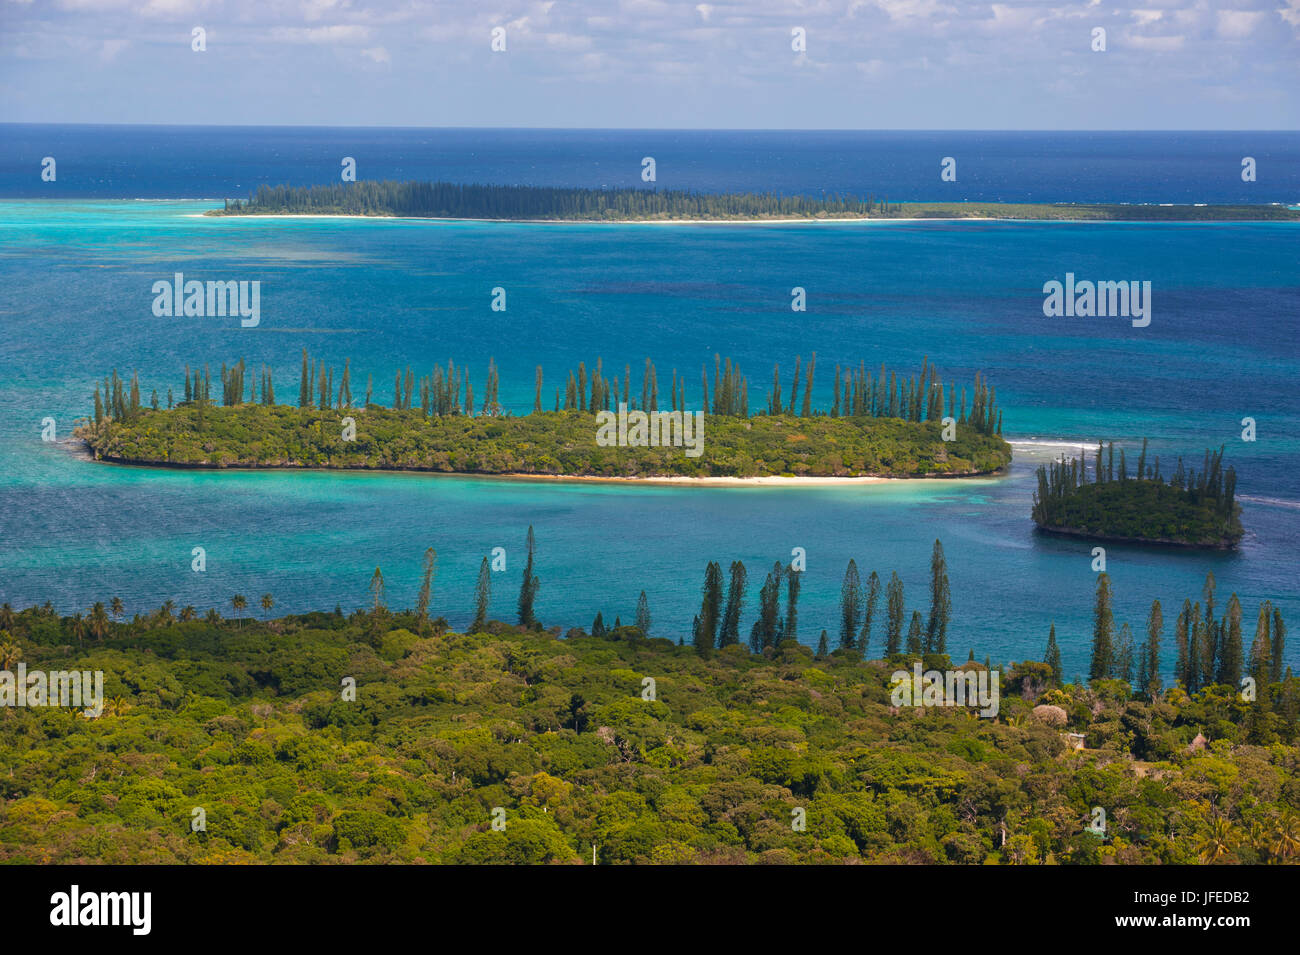 Overlook over the Ile des Pins, New Caledonia, Melanesia, South Pacific Stock Photo